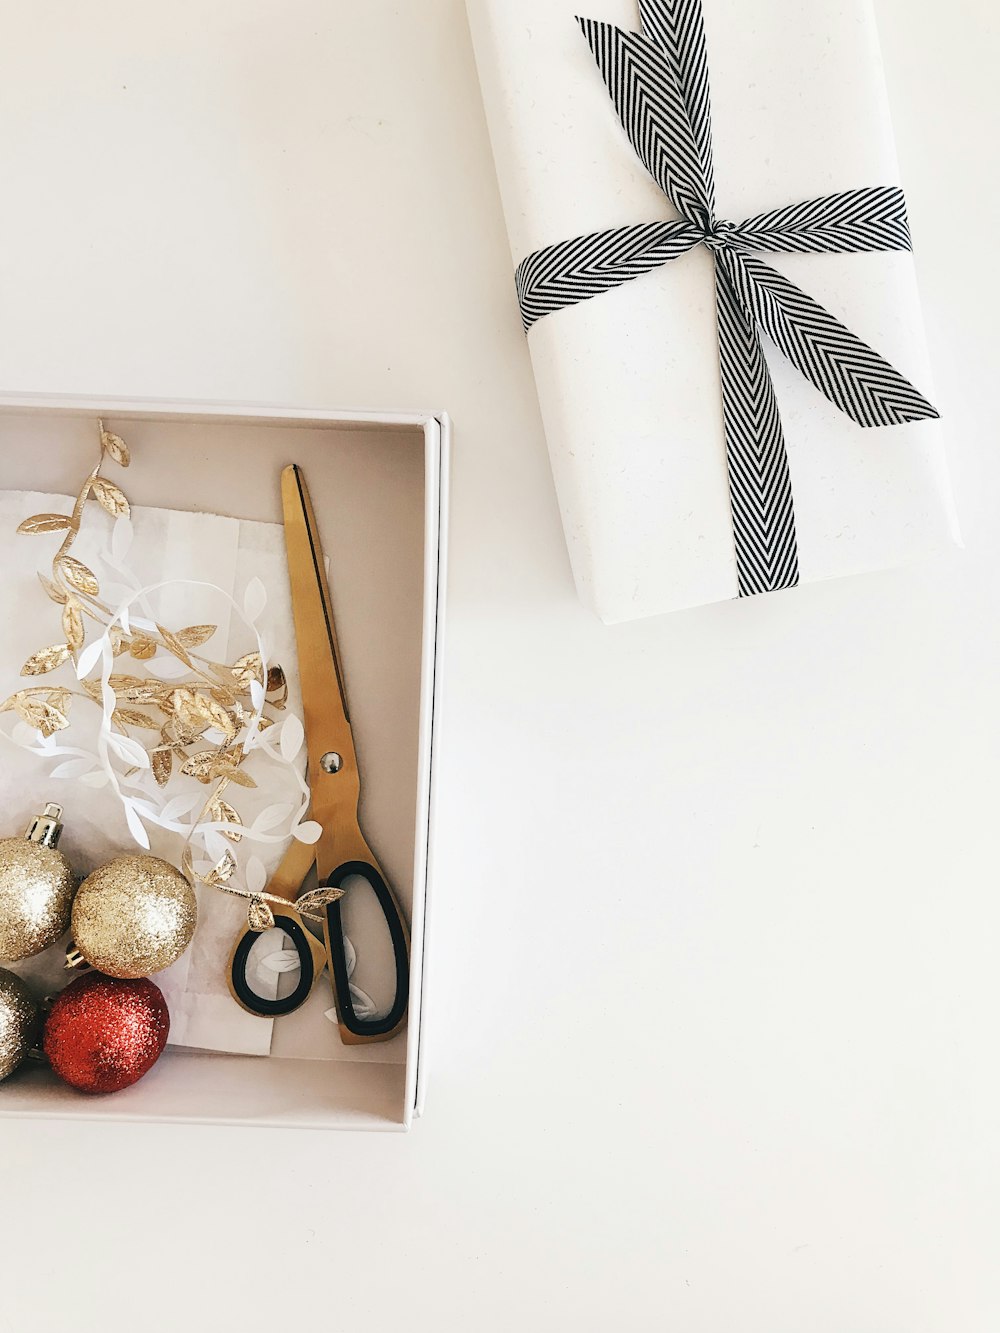 Gift Wrapping Concept Wrapping Paper Rope Tape And Scissors On Beige  Background Top View Handmade Flat Lay Copy Space Stock Photo - Download  Image Now - iStock